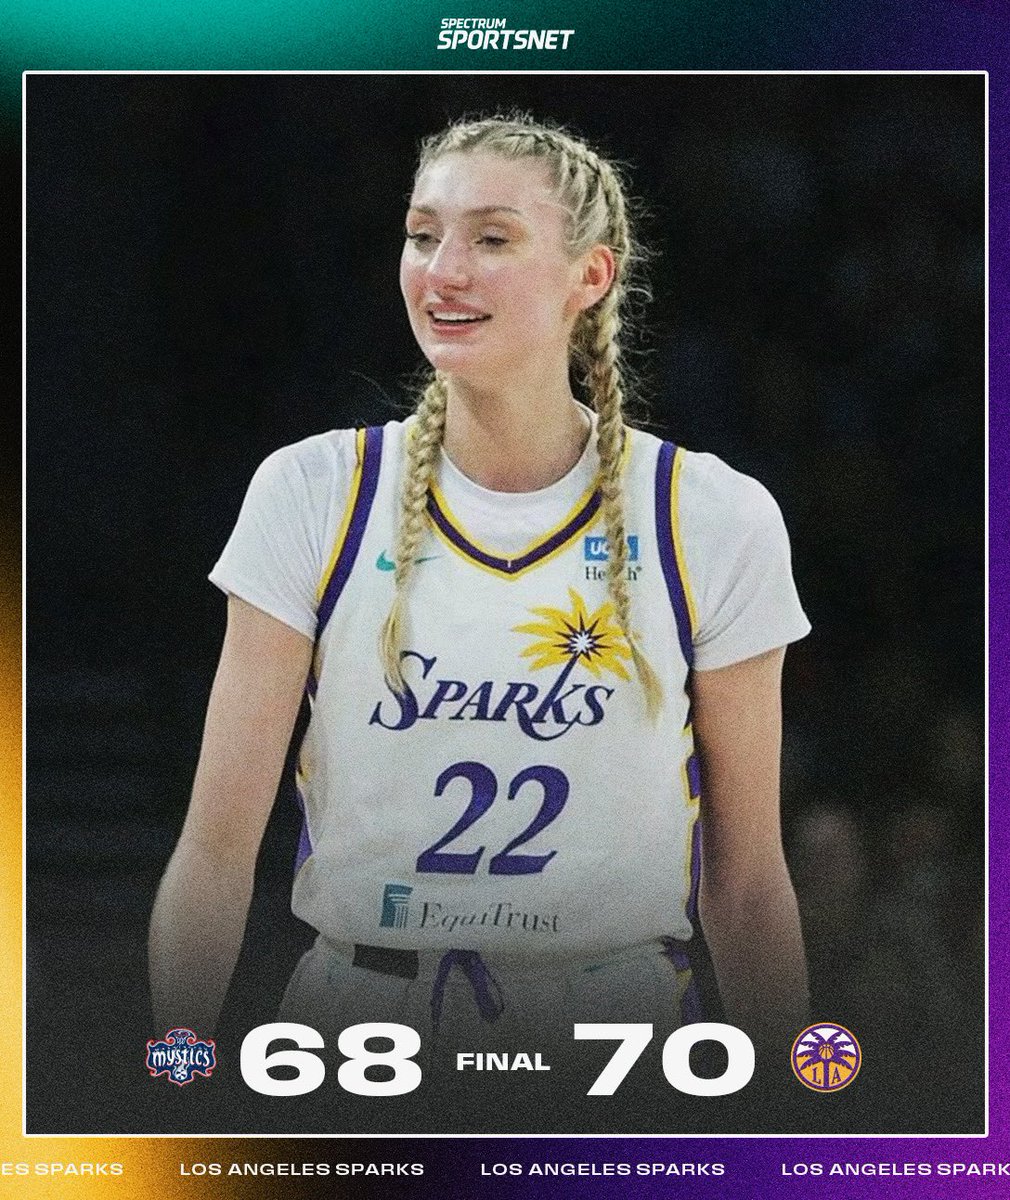 SPARKS WIN!